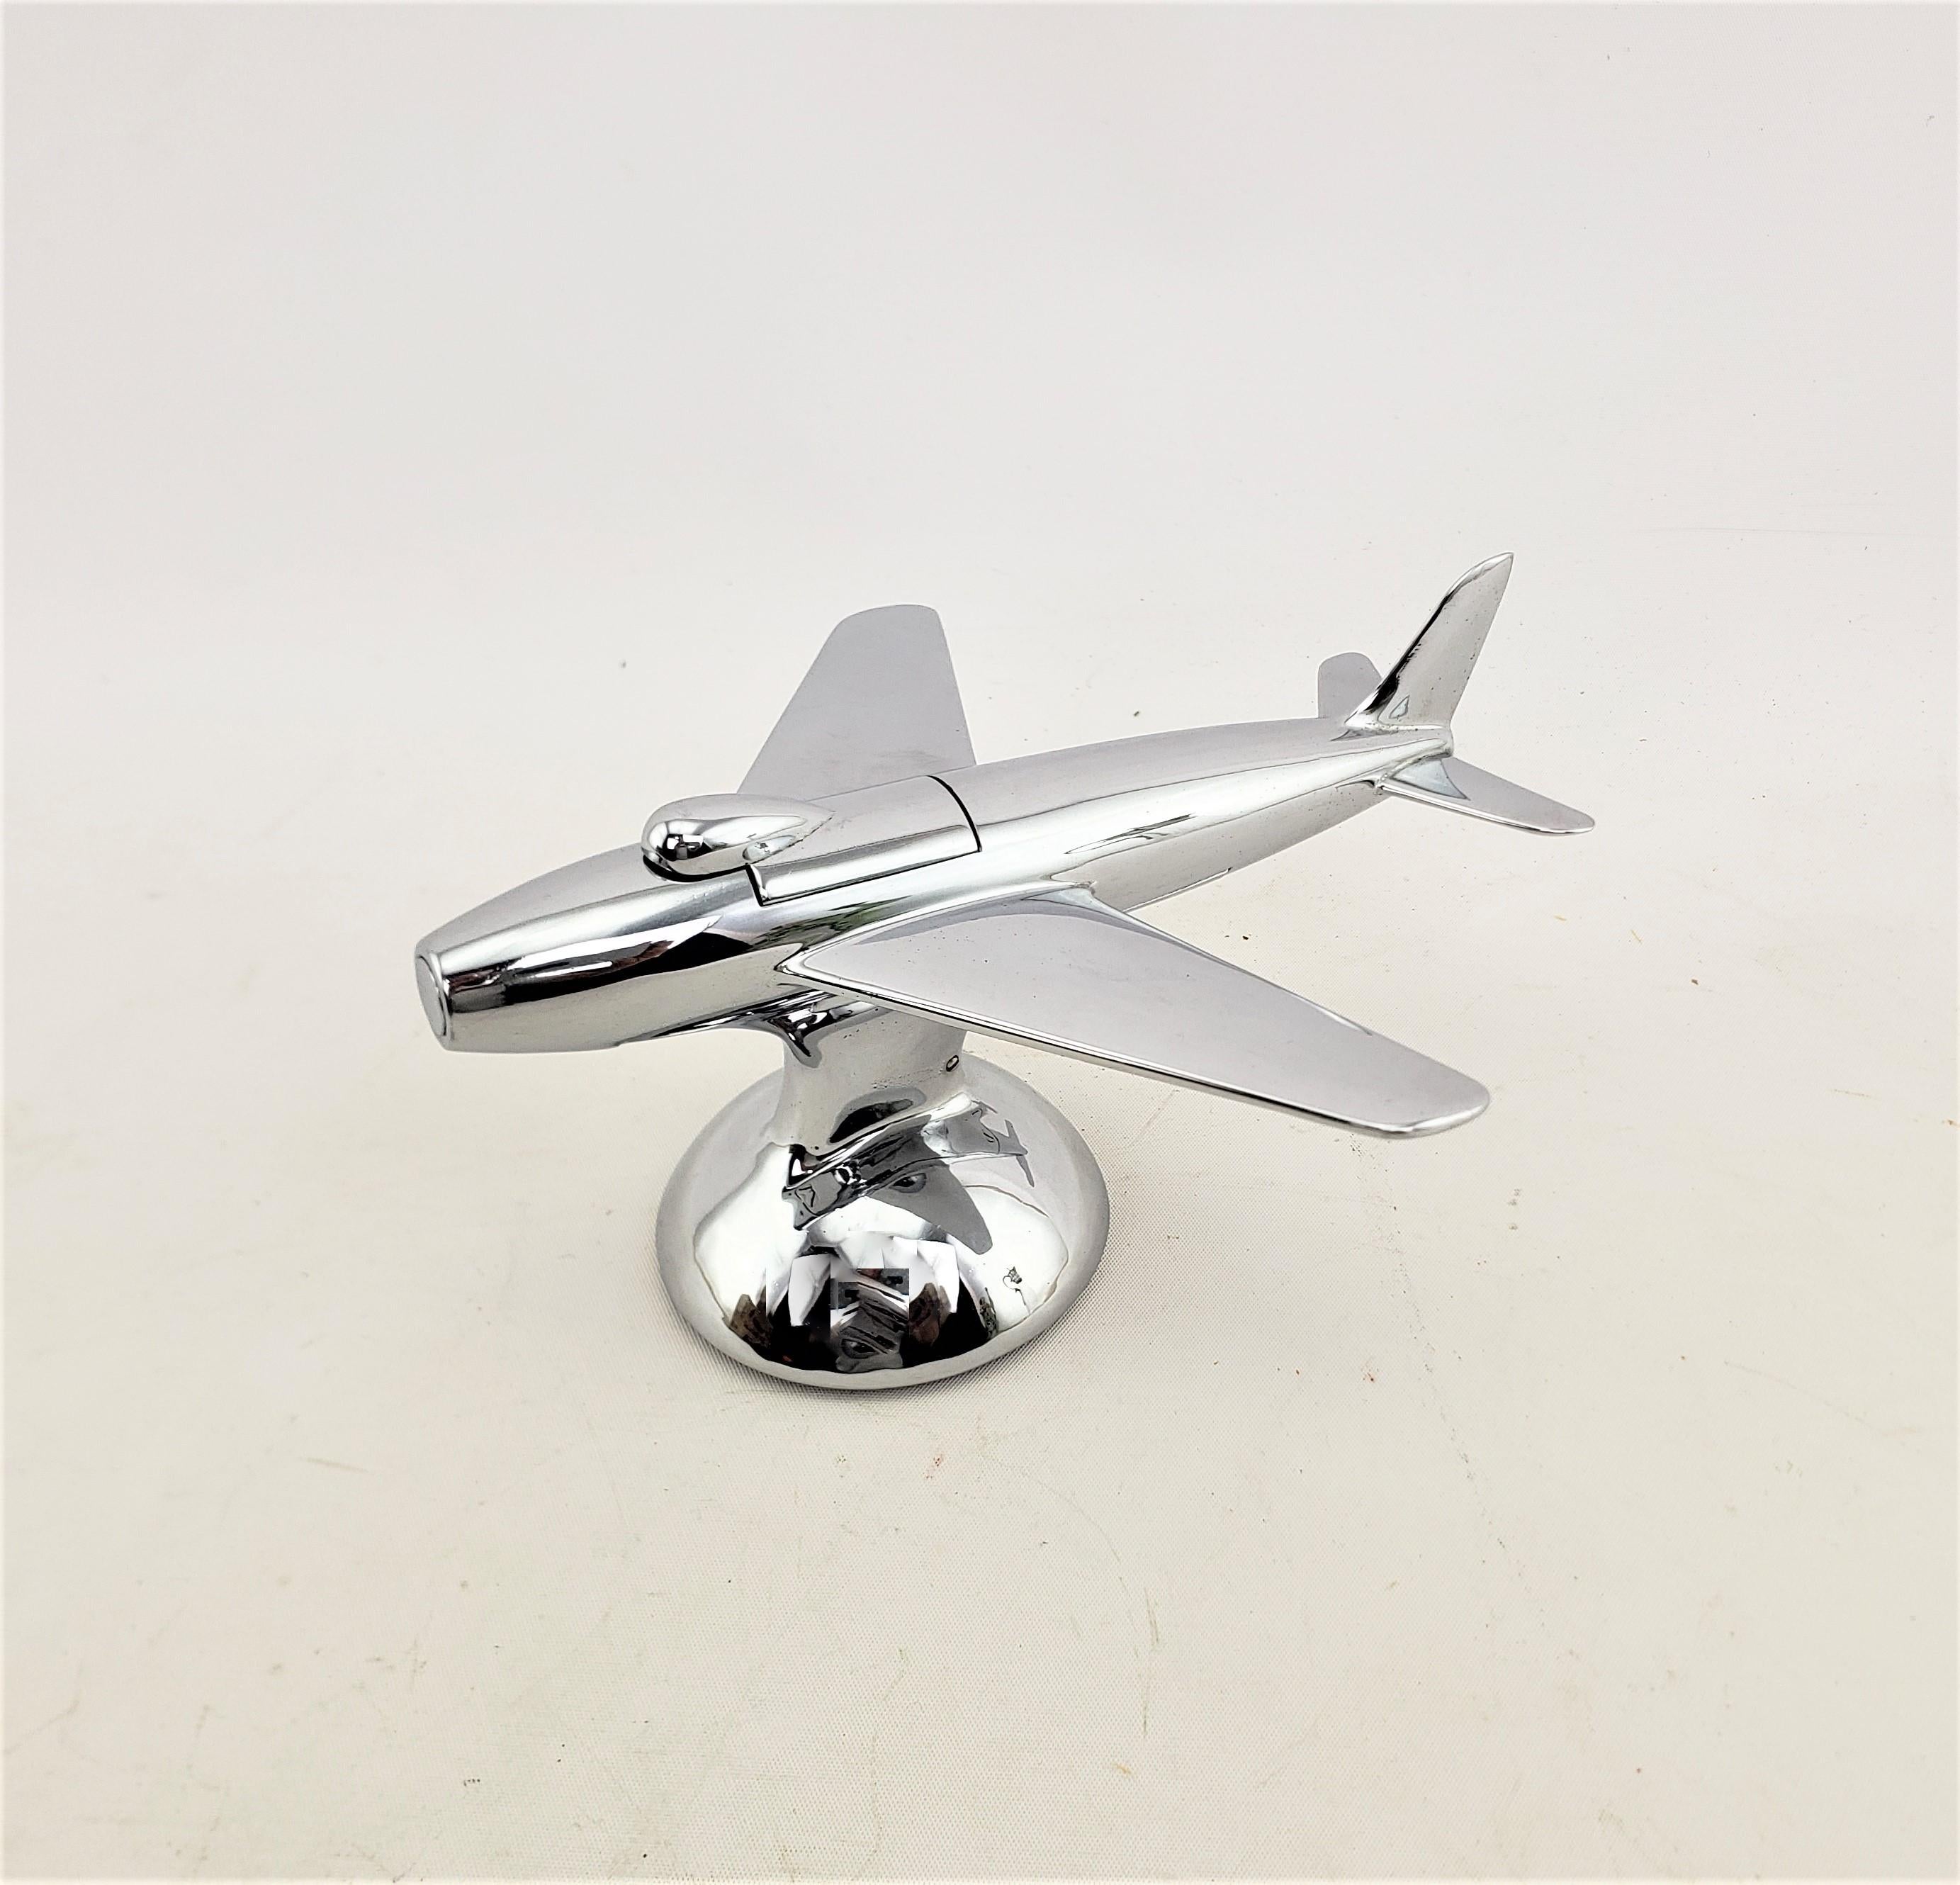 This chrome table lighter was made by the renowned Alfred Dunhill Company of England and dates to 1960 and done in the period Mid-Century Modern style. The lighter is made in the likeness of the F-86 fighter jet, which set world speed records some